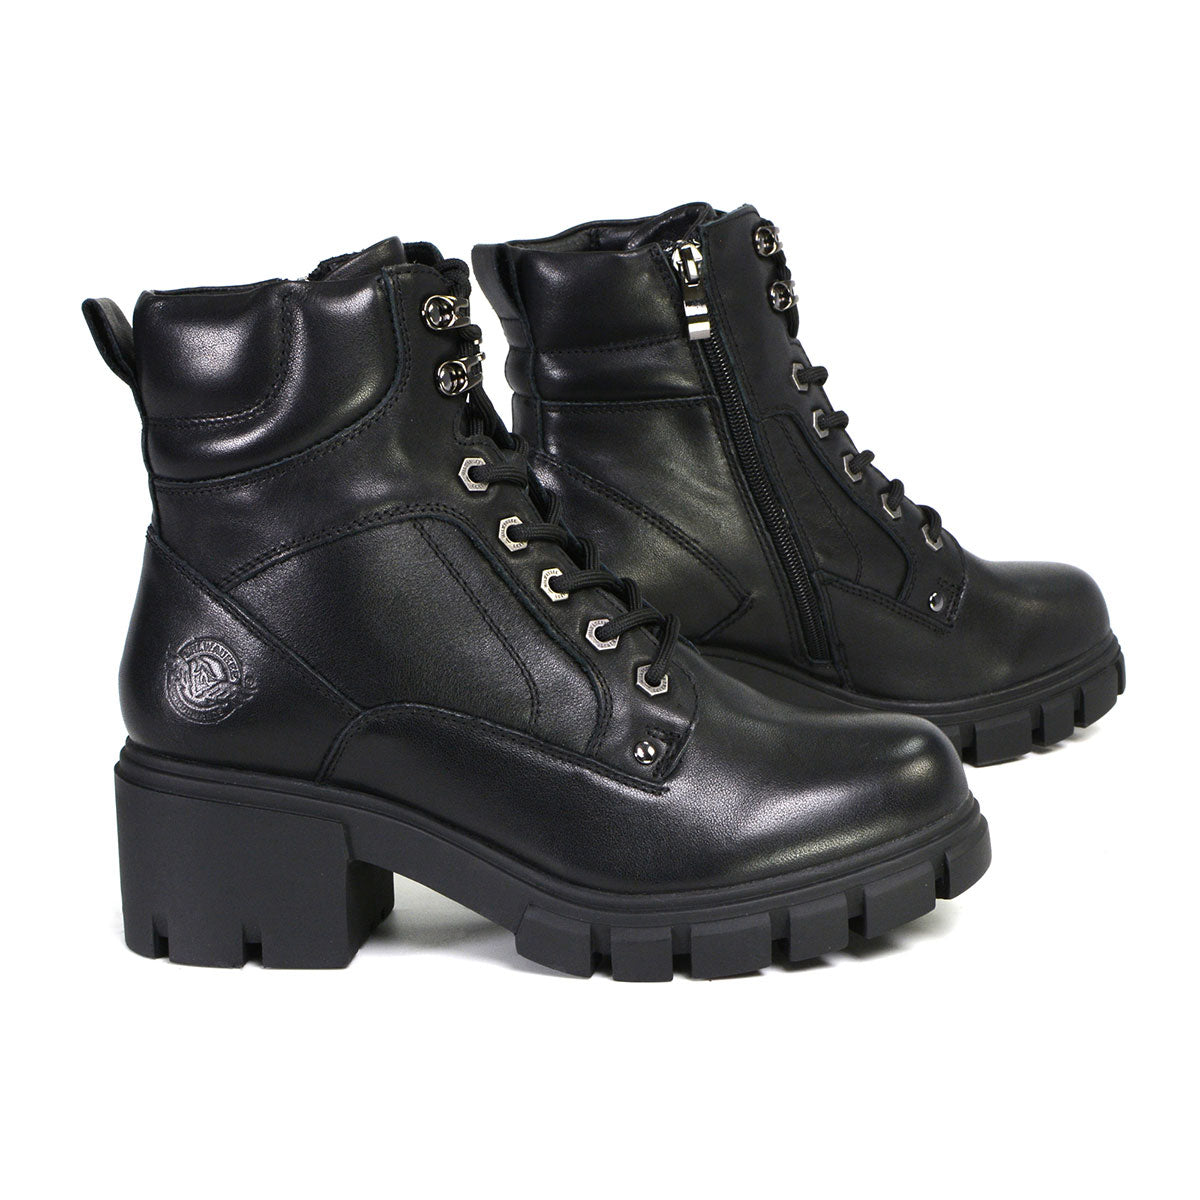 Milwaukee Leather MBL9447 Women's ‘Garter’ Premium Black Leather Lace-Up Fashion Motorcycle Boots